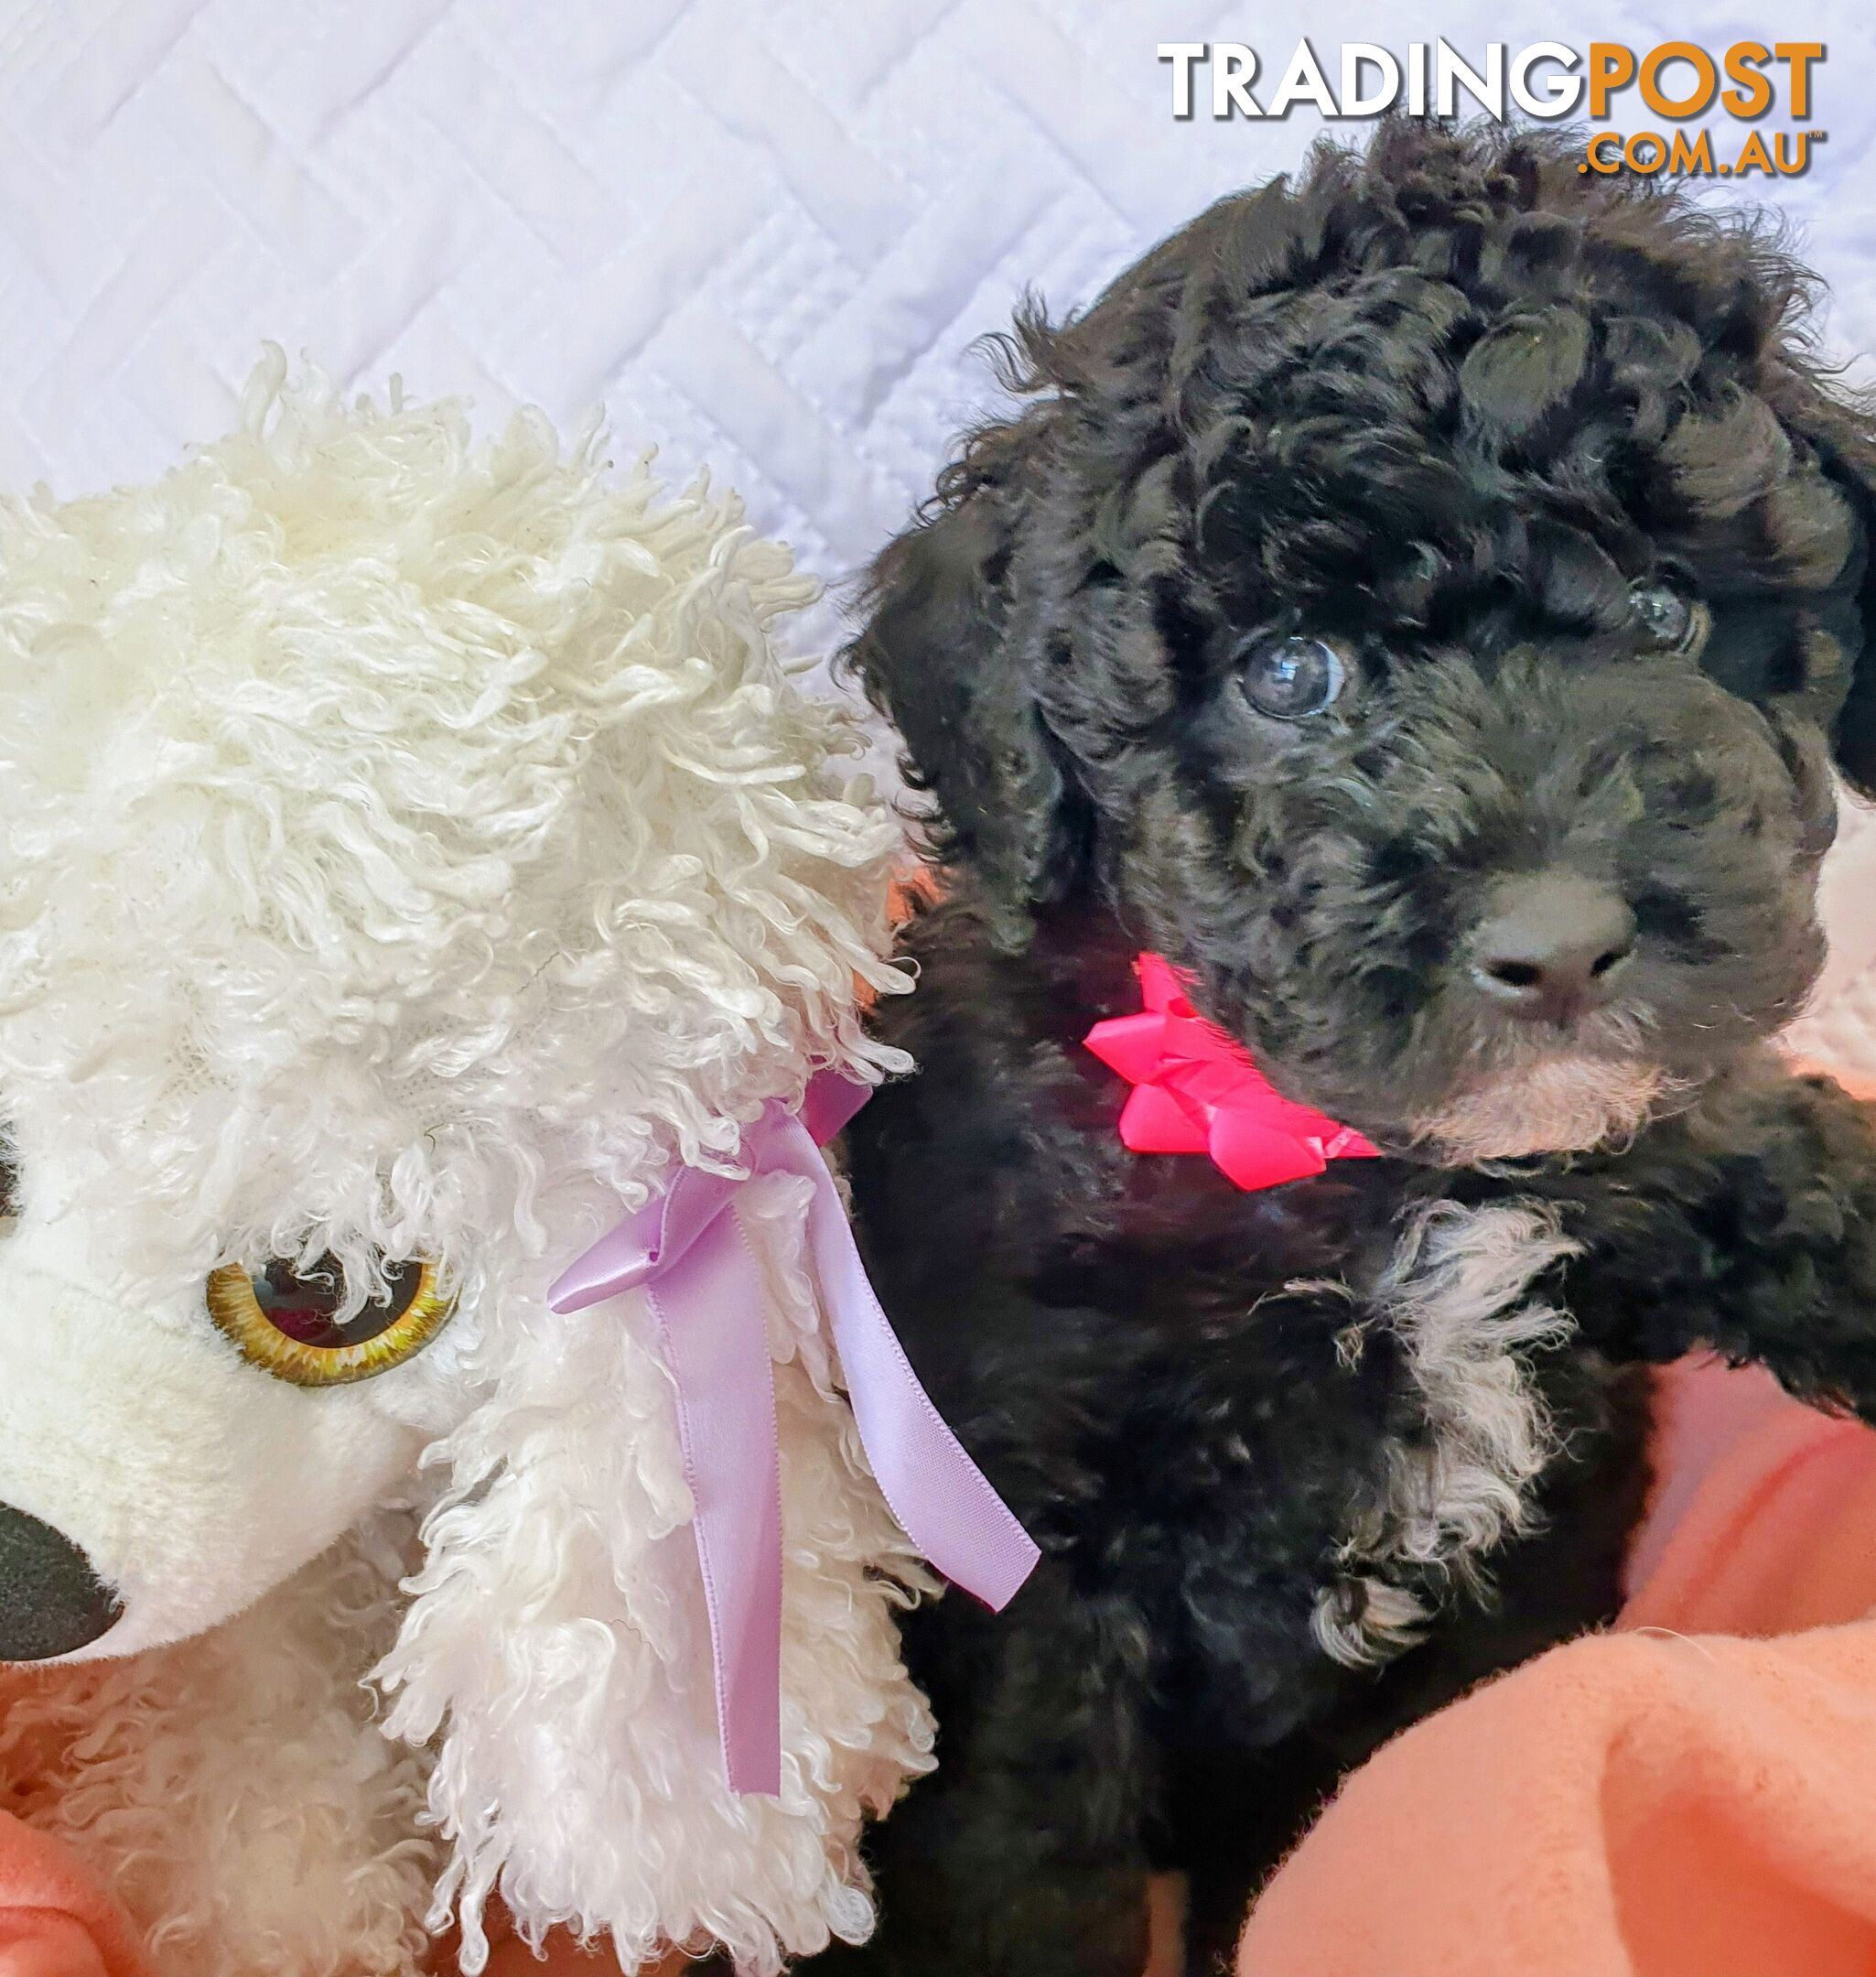 QUALITY PURE BRED MINIATURE POODLE PUPPIES. DNA TESTED PARENTS